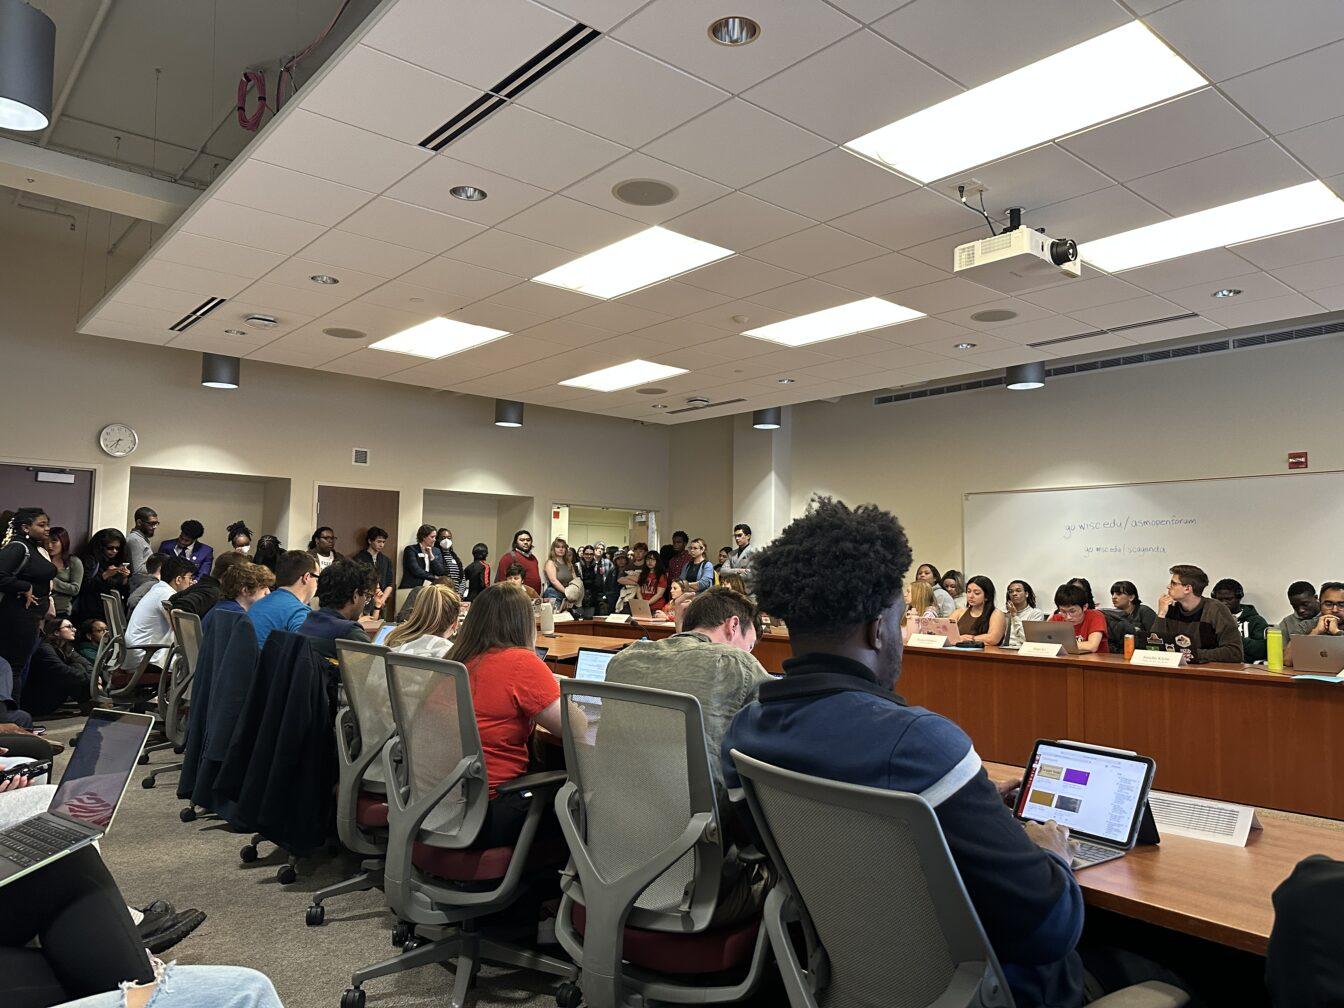 Students call for action from ASM, university in student council meeting following racist video